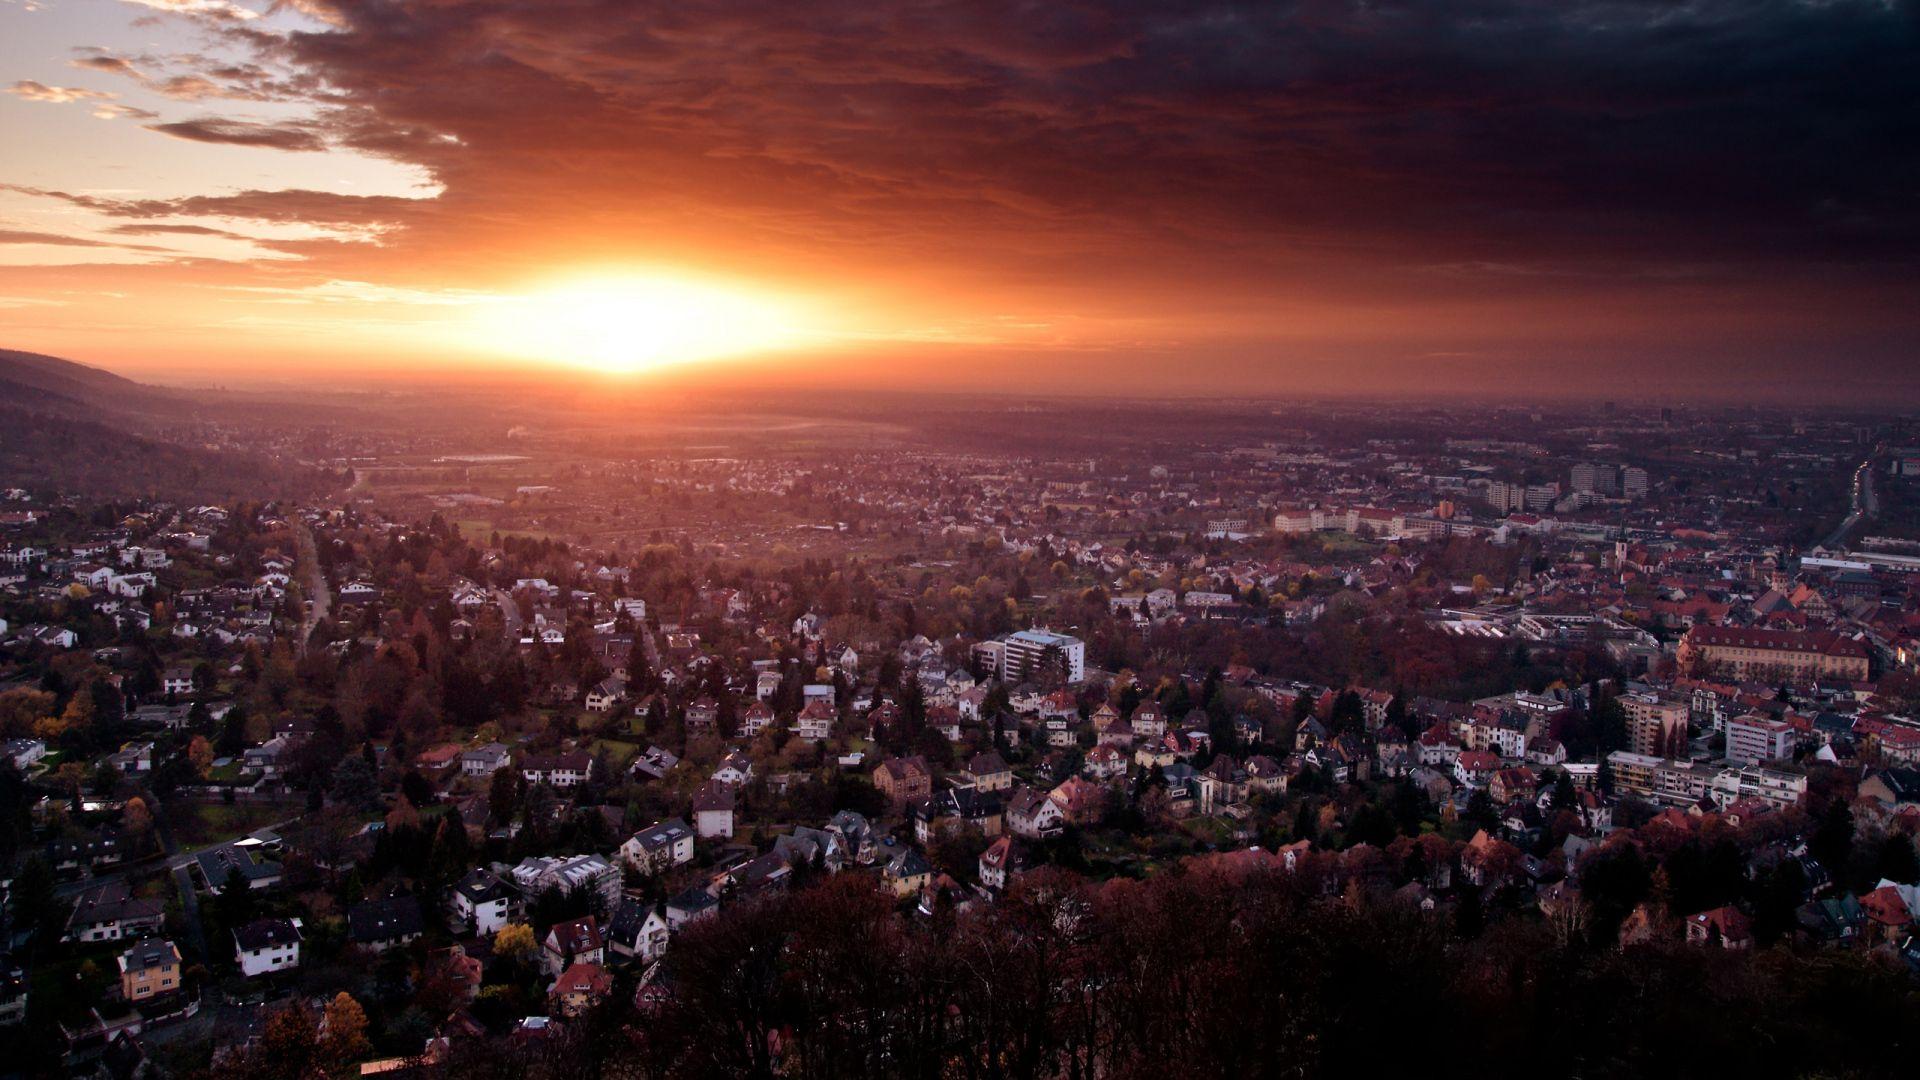 Download Wallpaper 1920x1080 germany, sunset, city, end of day Full